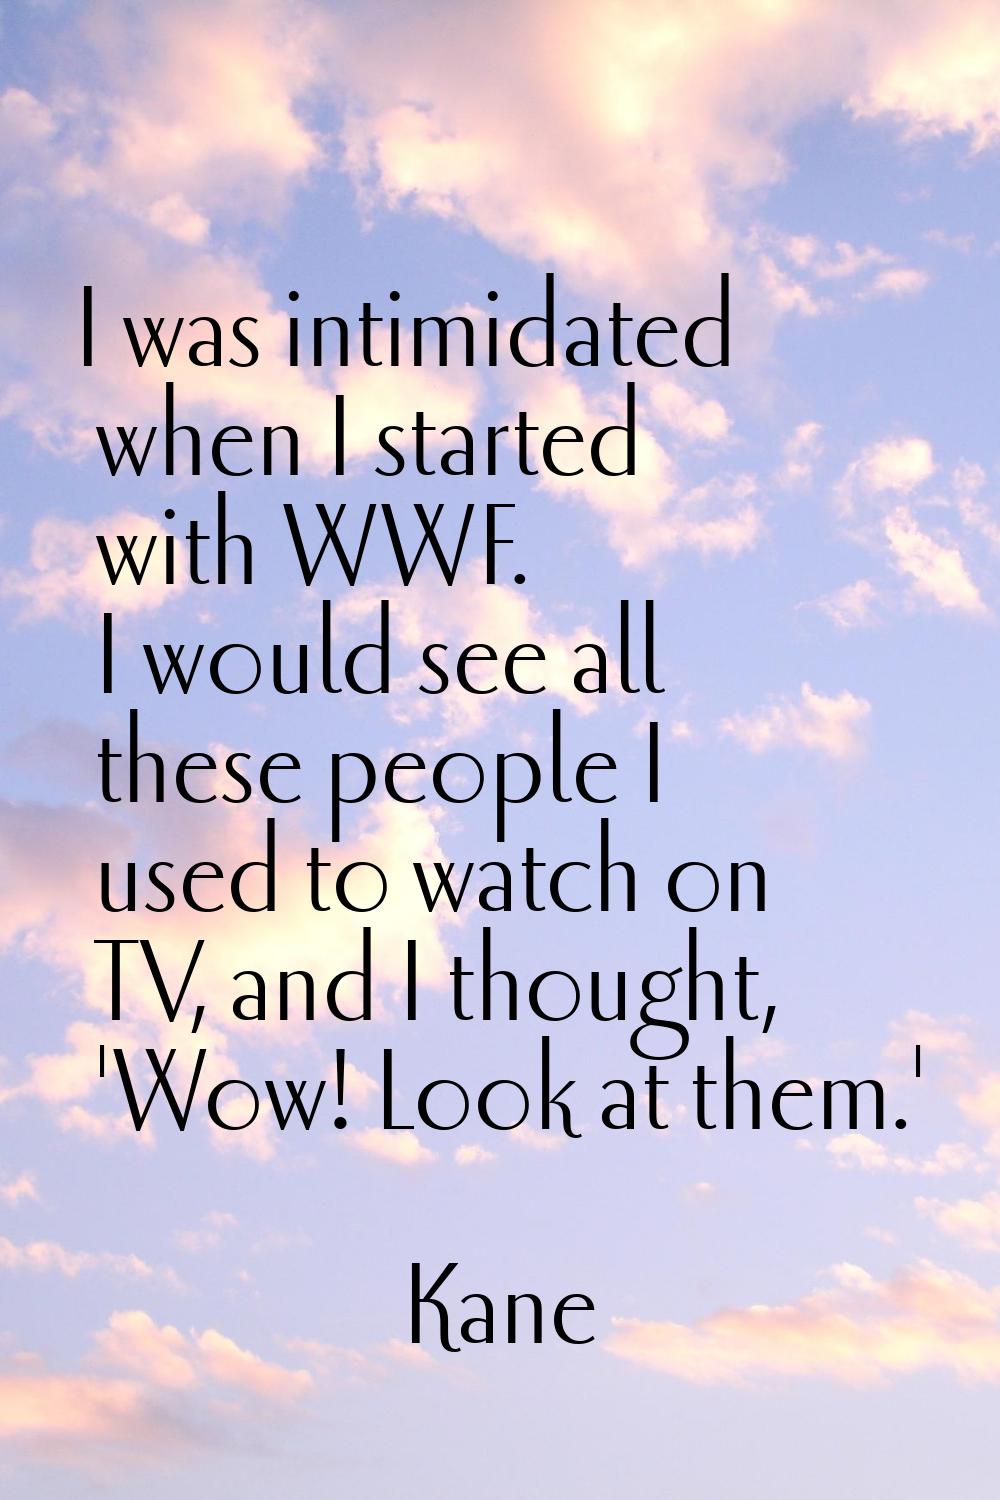 I was intimidated when I started with WWF. I would see all these people I used to watch on TV, and 